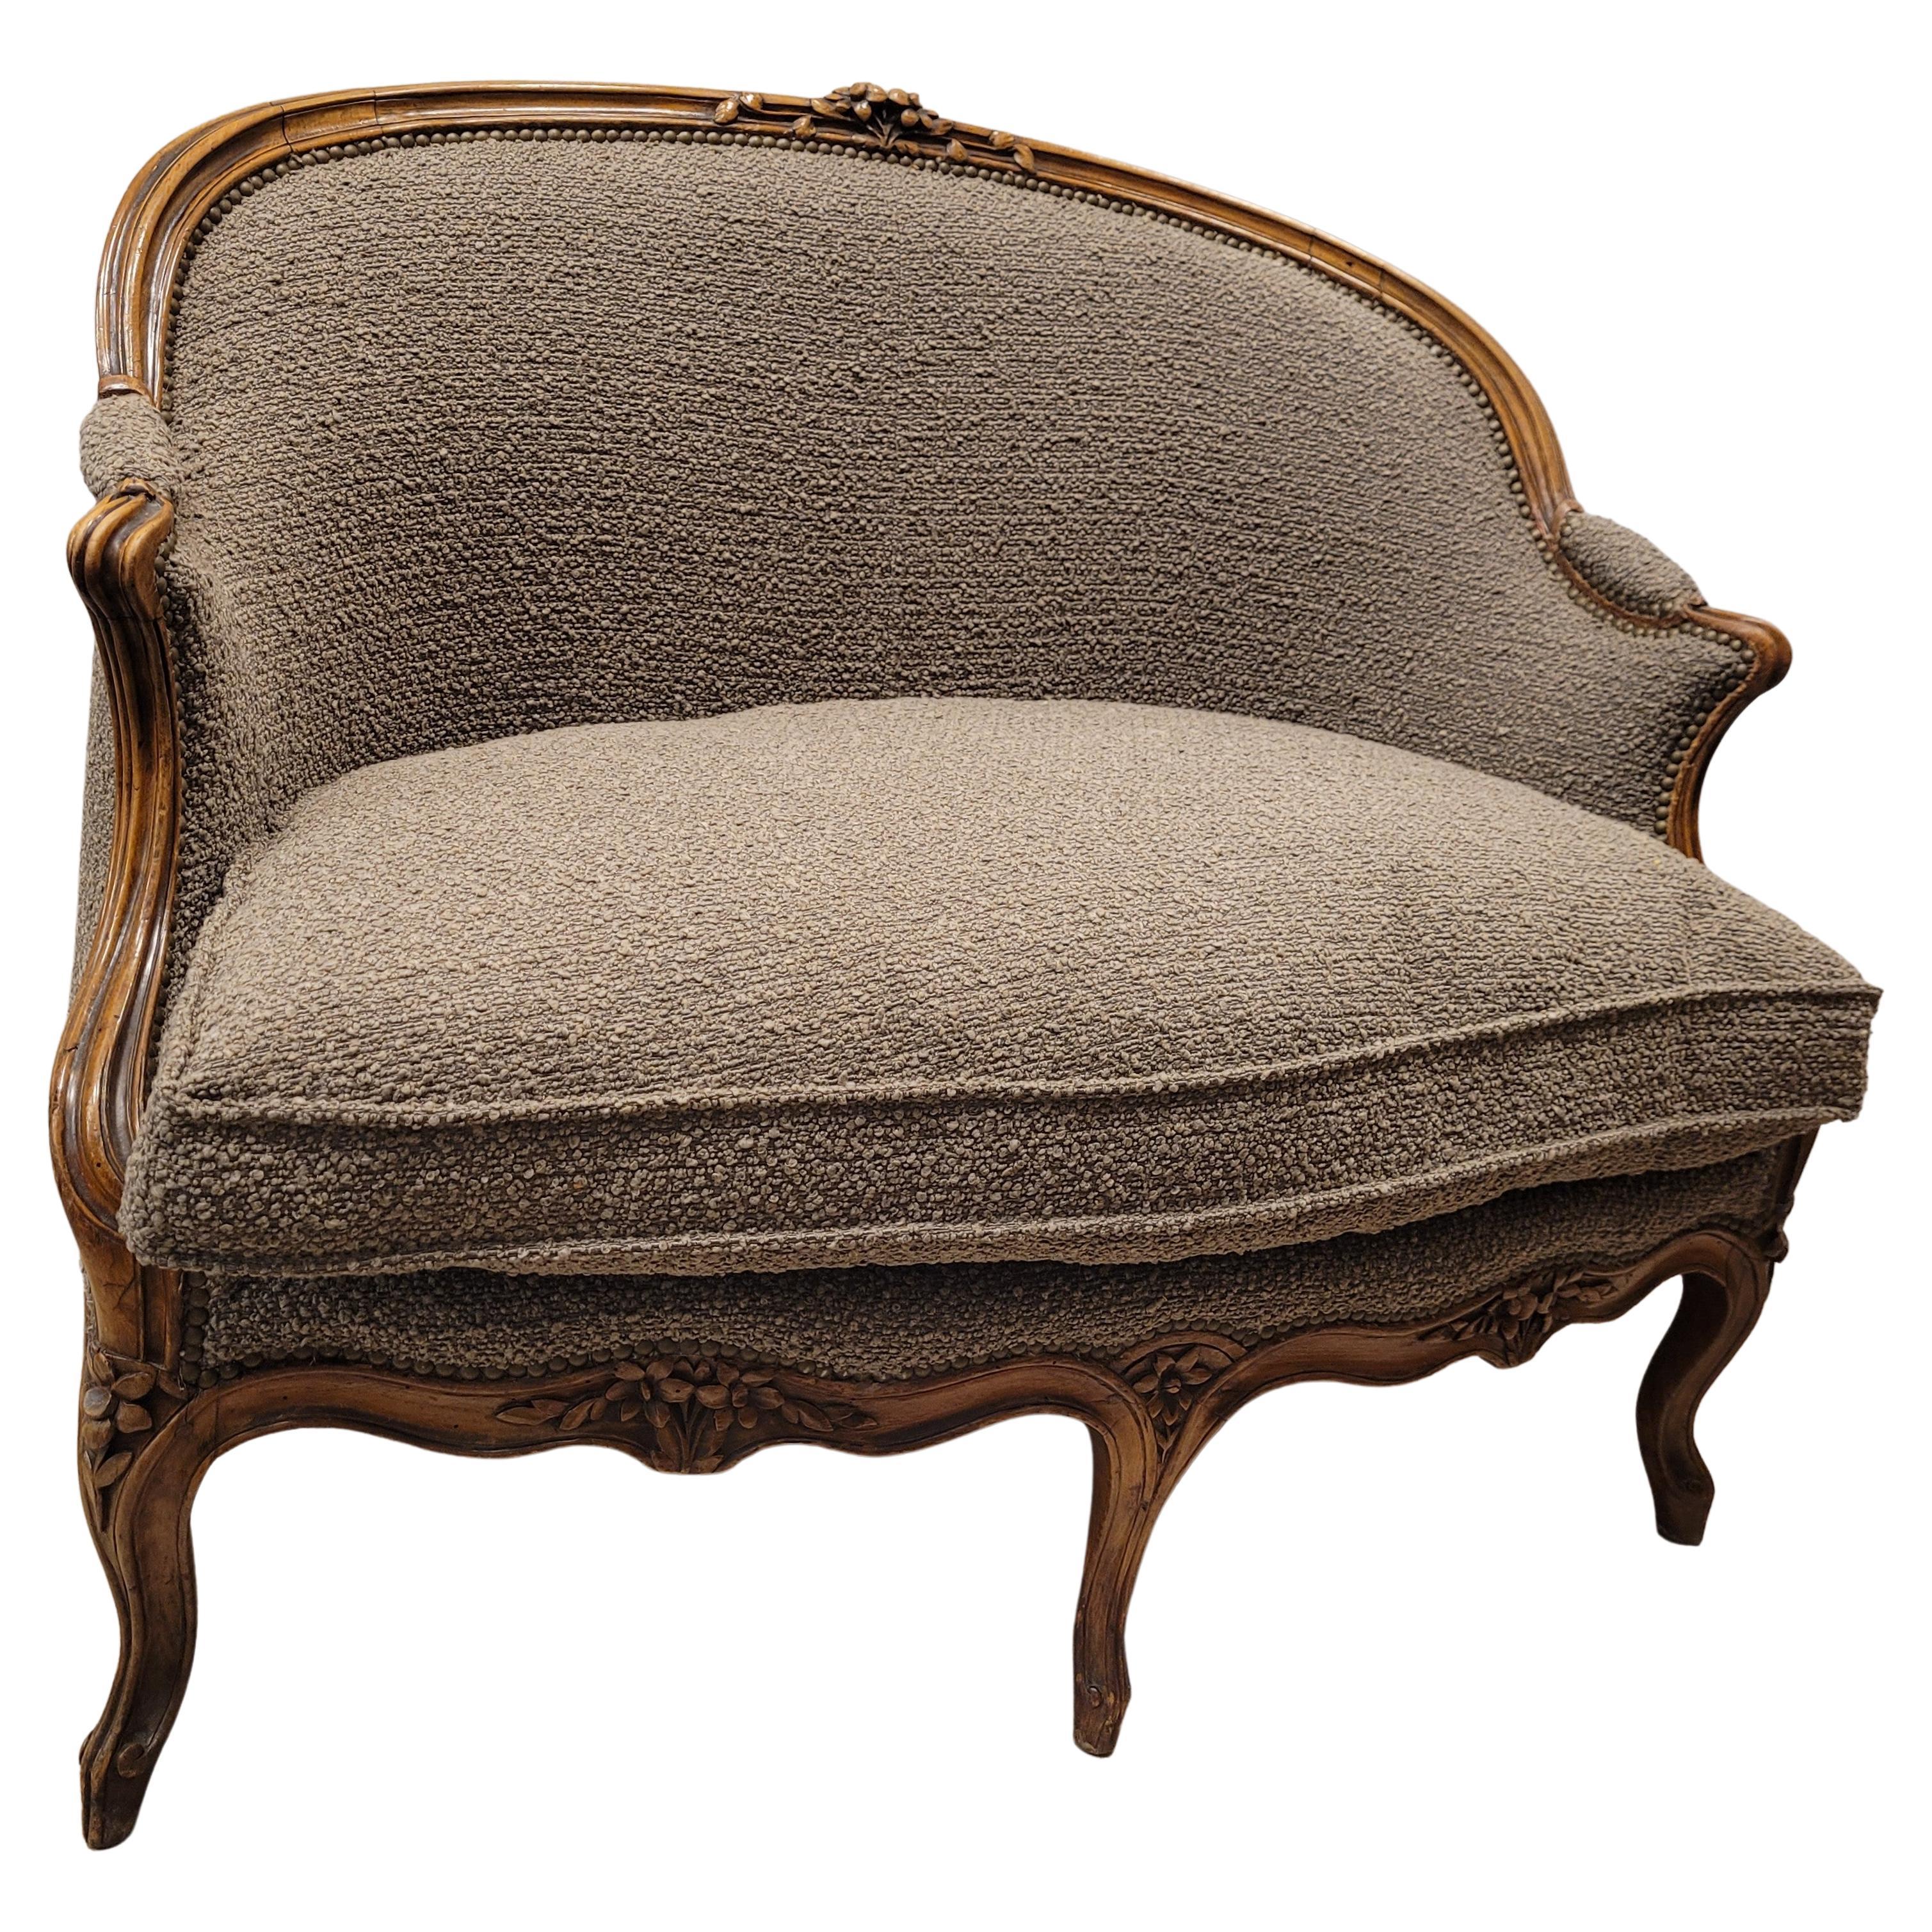 French Sofa -Canape Luis xv Mink Color, Wood 